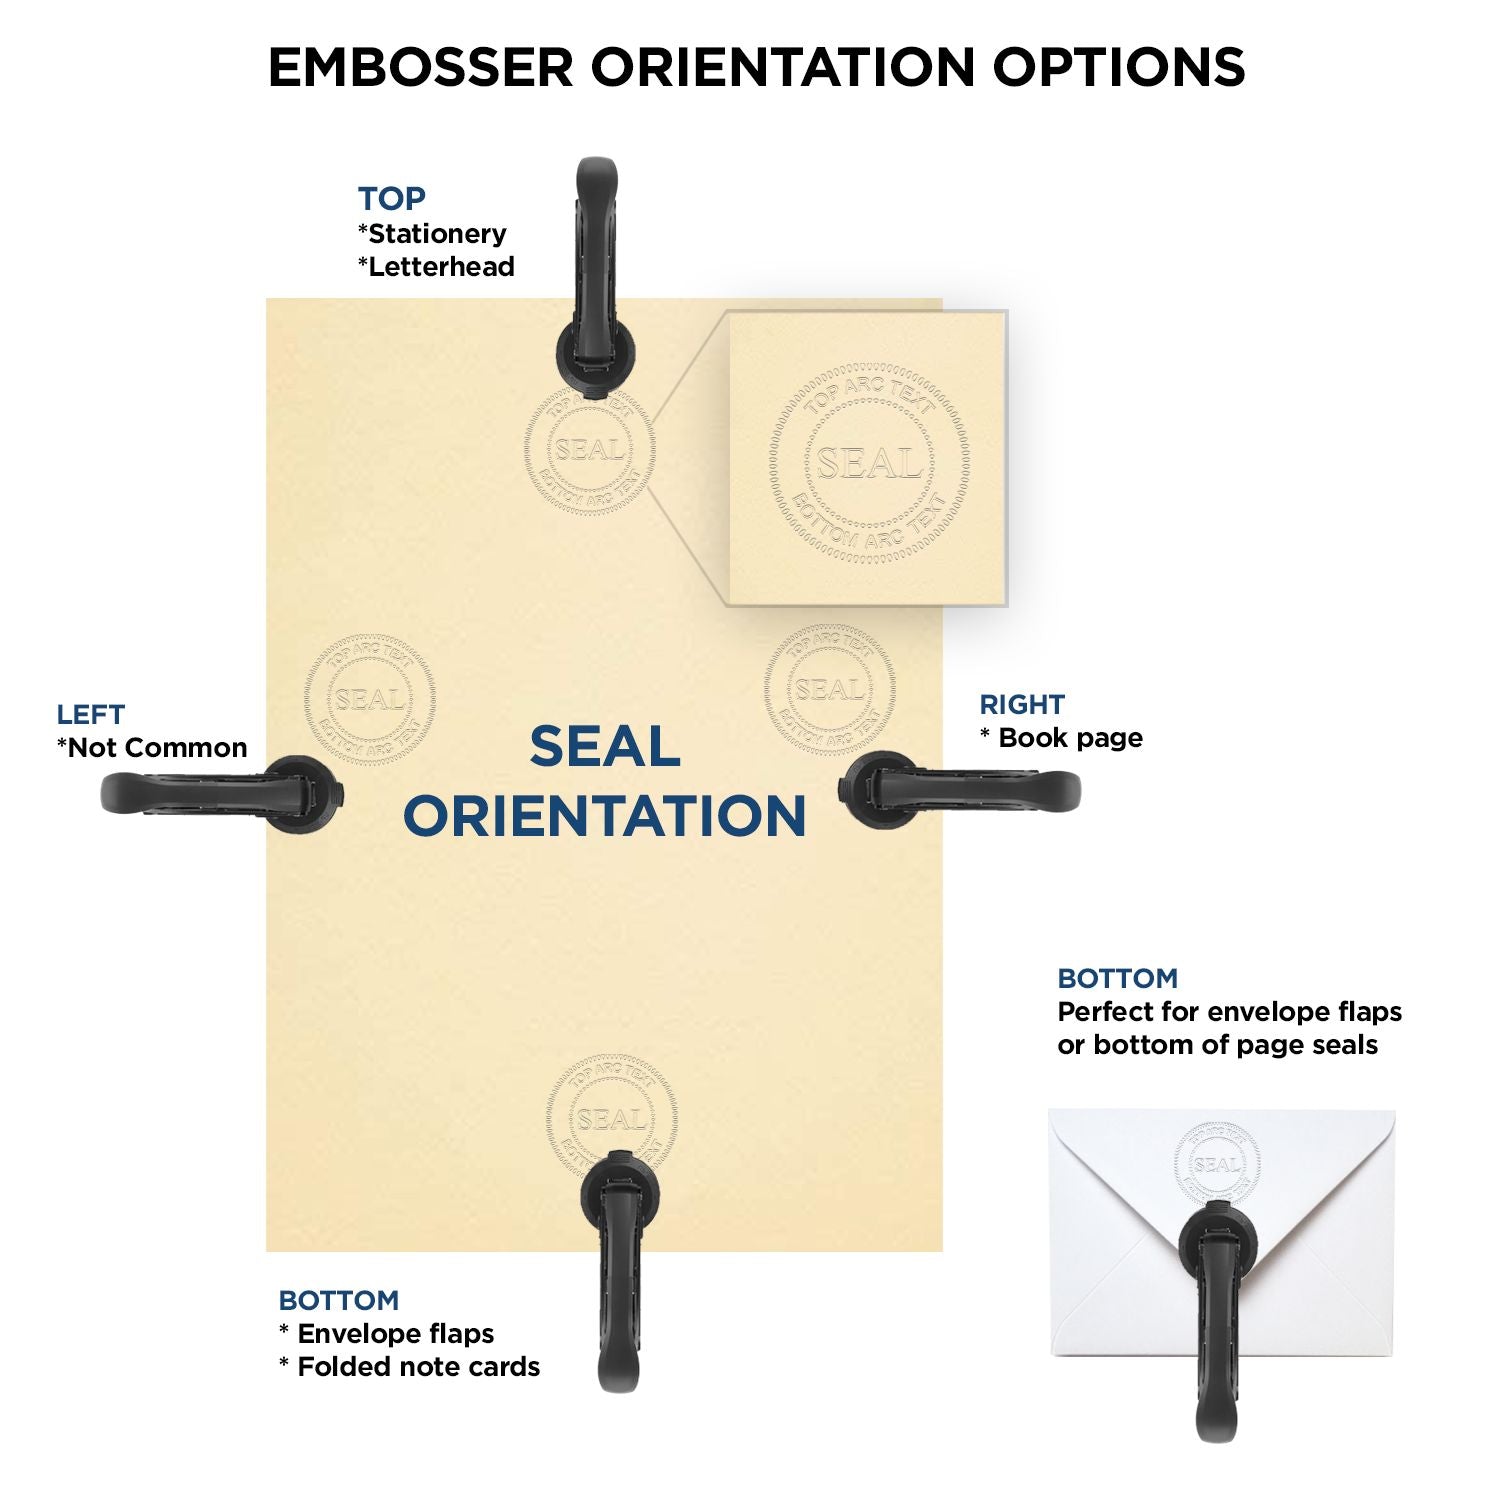 An infographic for the Hybrid Alabama Land Surveyor Seal showing embosser orientation, this is showing examples of a top, bottom, right and left insert.